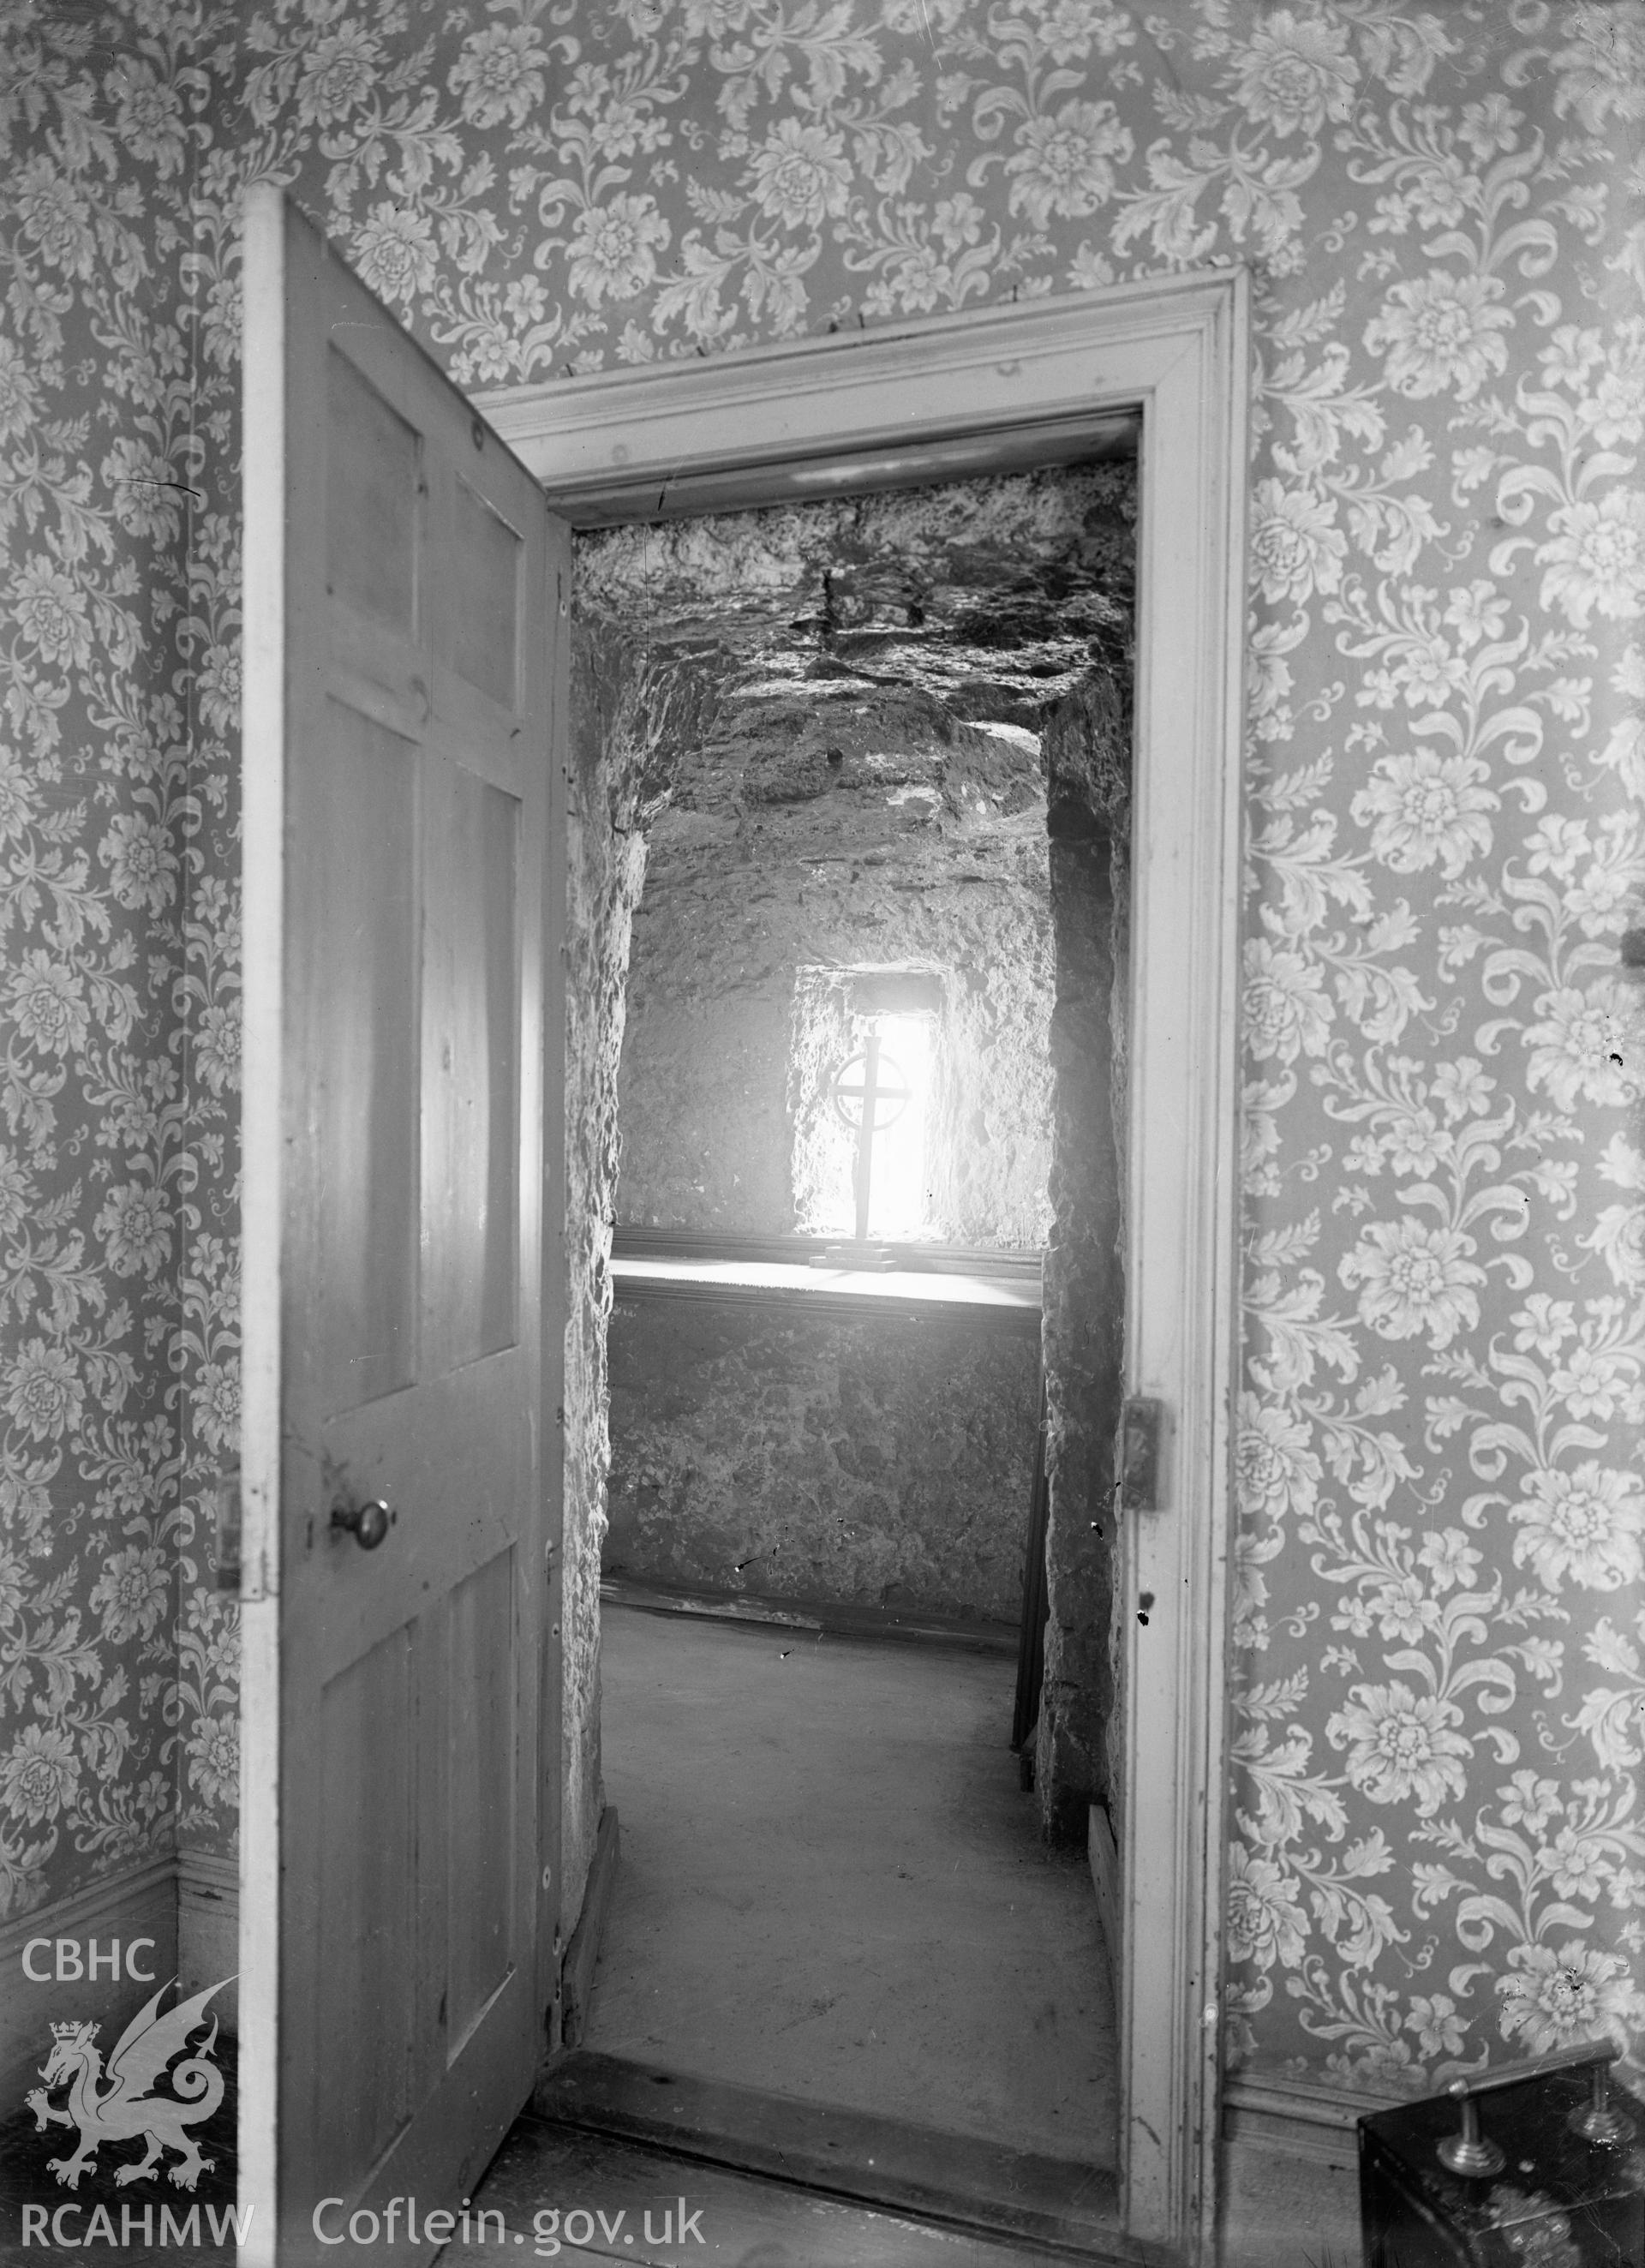 Black and white glass negative showing interior doorway in unknown location, from National Buildings Record.